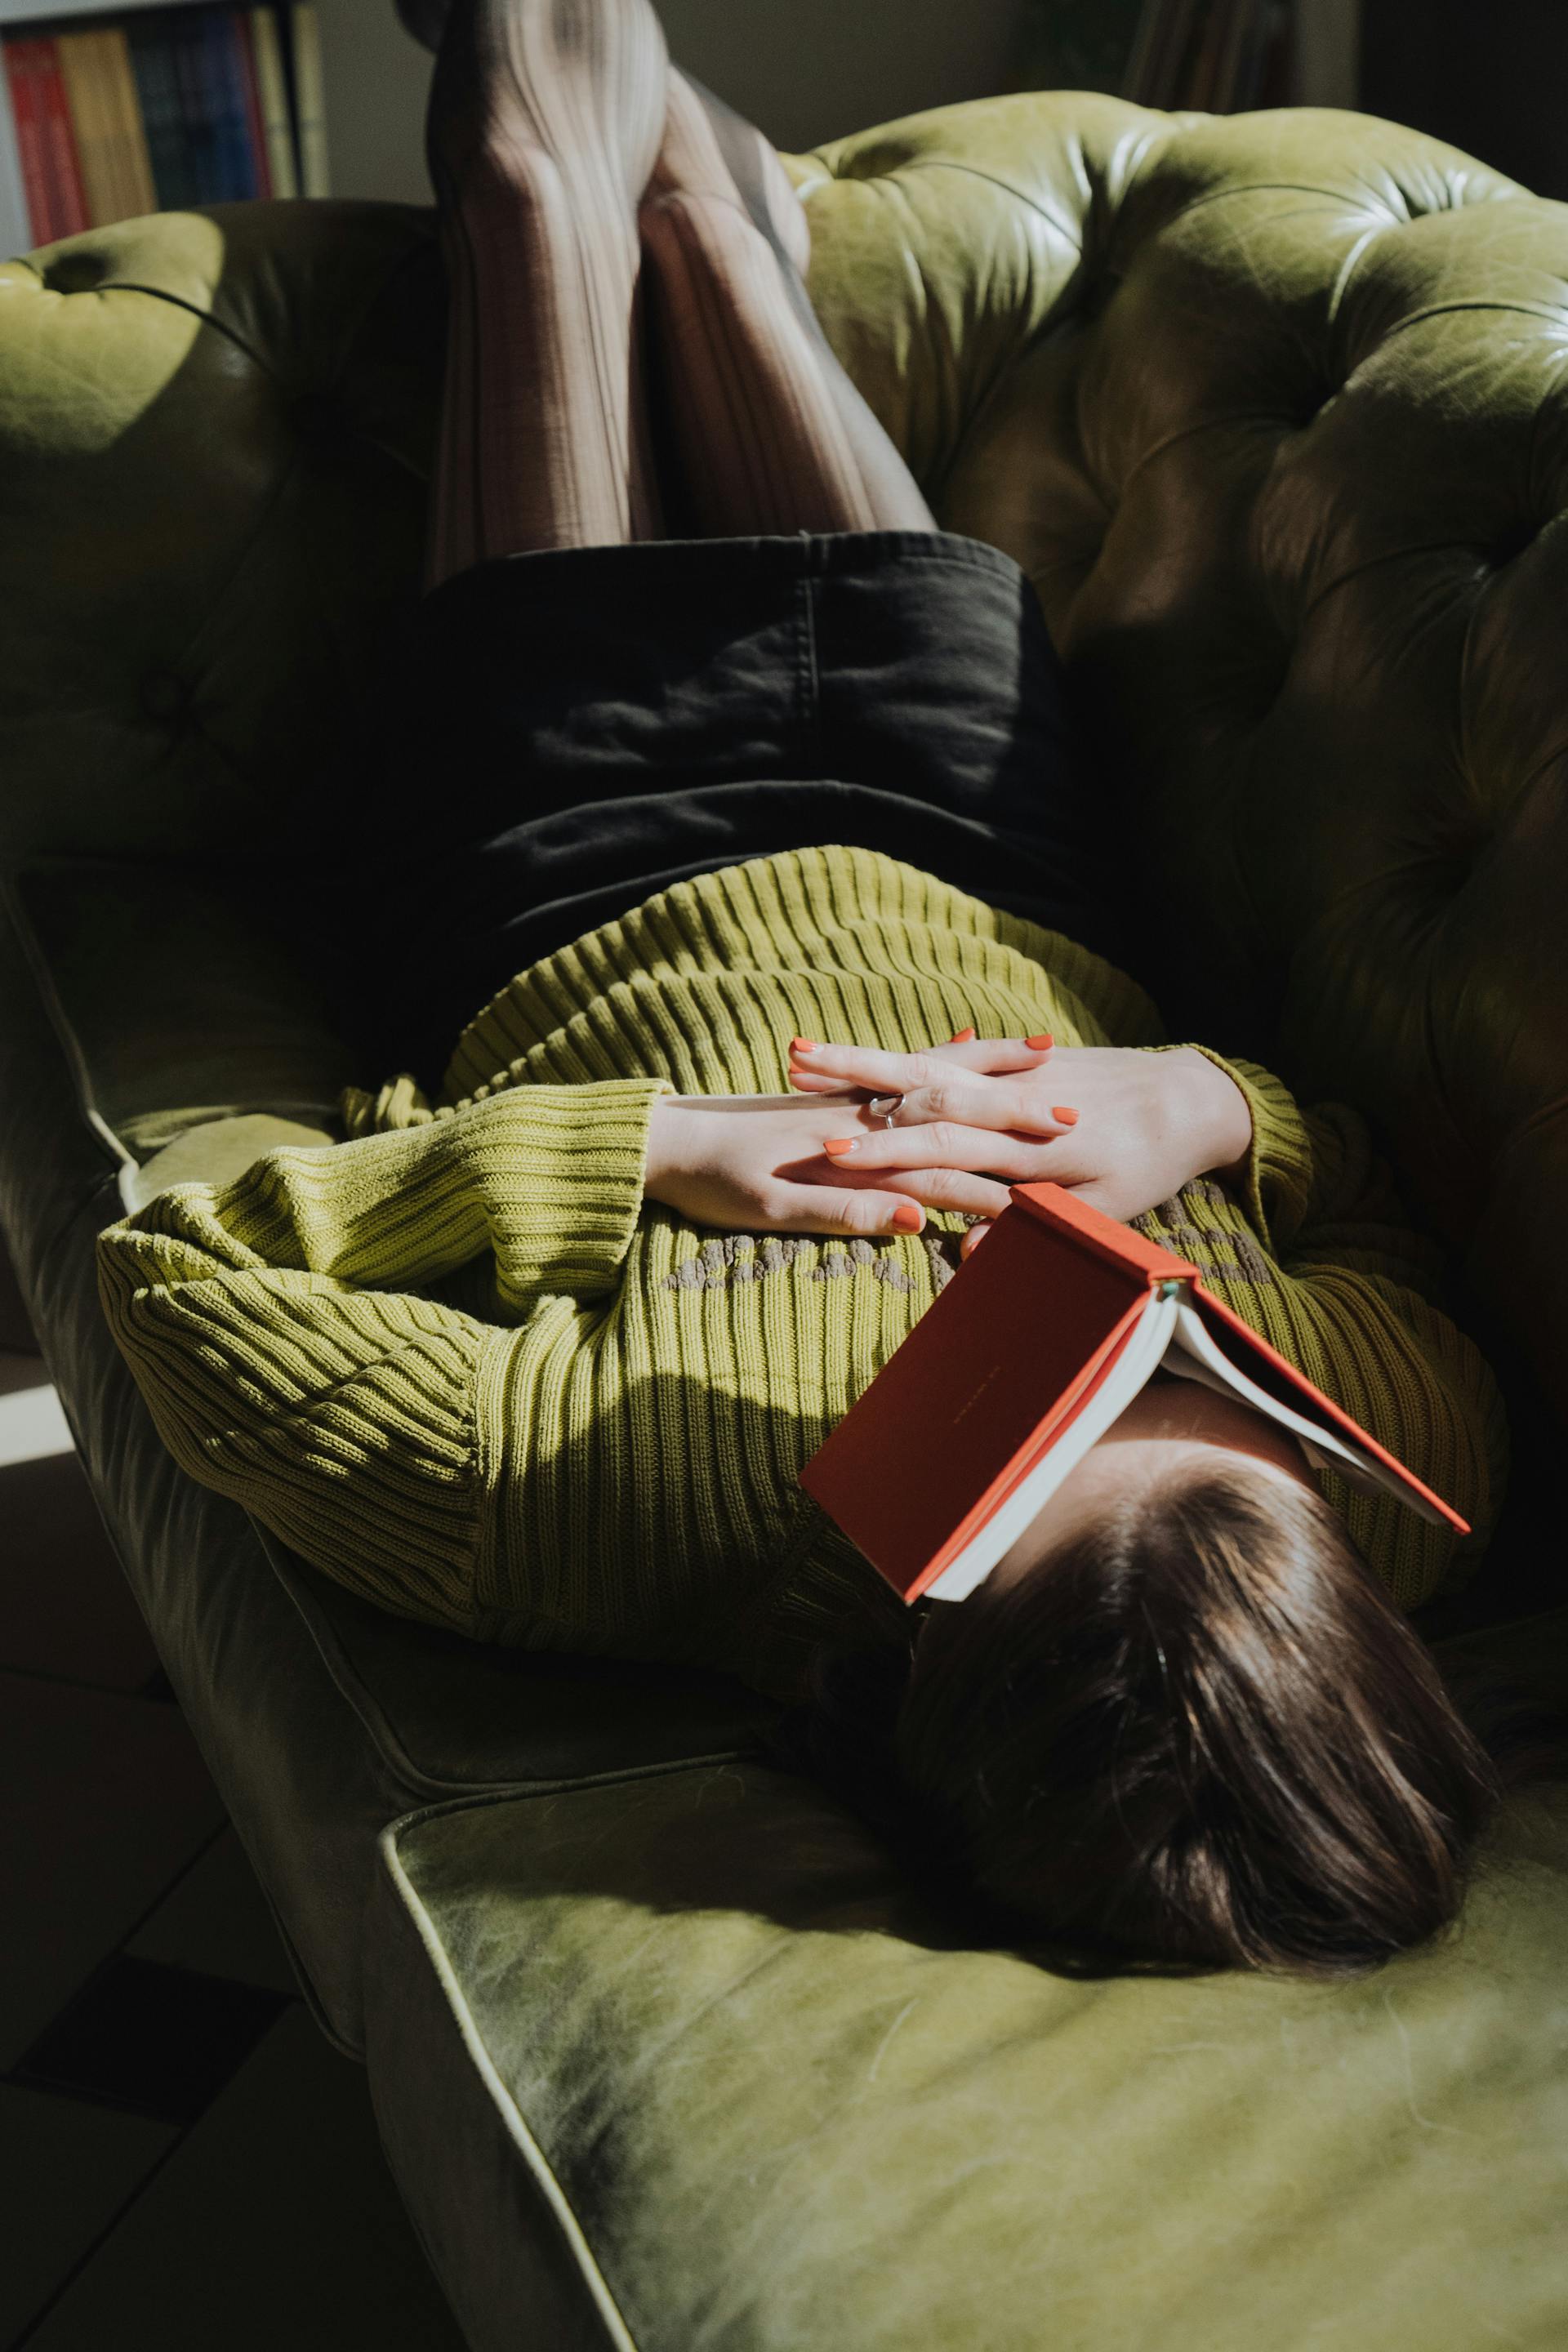 A woman laying on a couch with a book | Source: Pexels